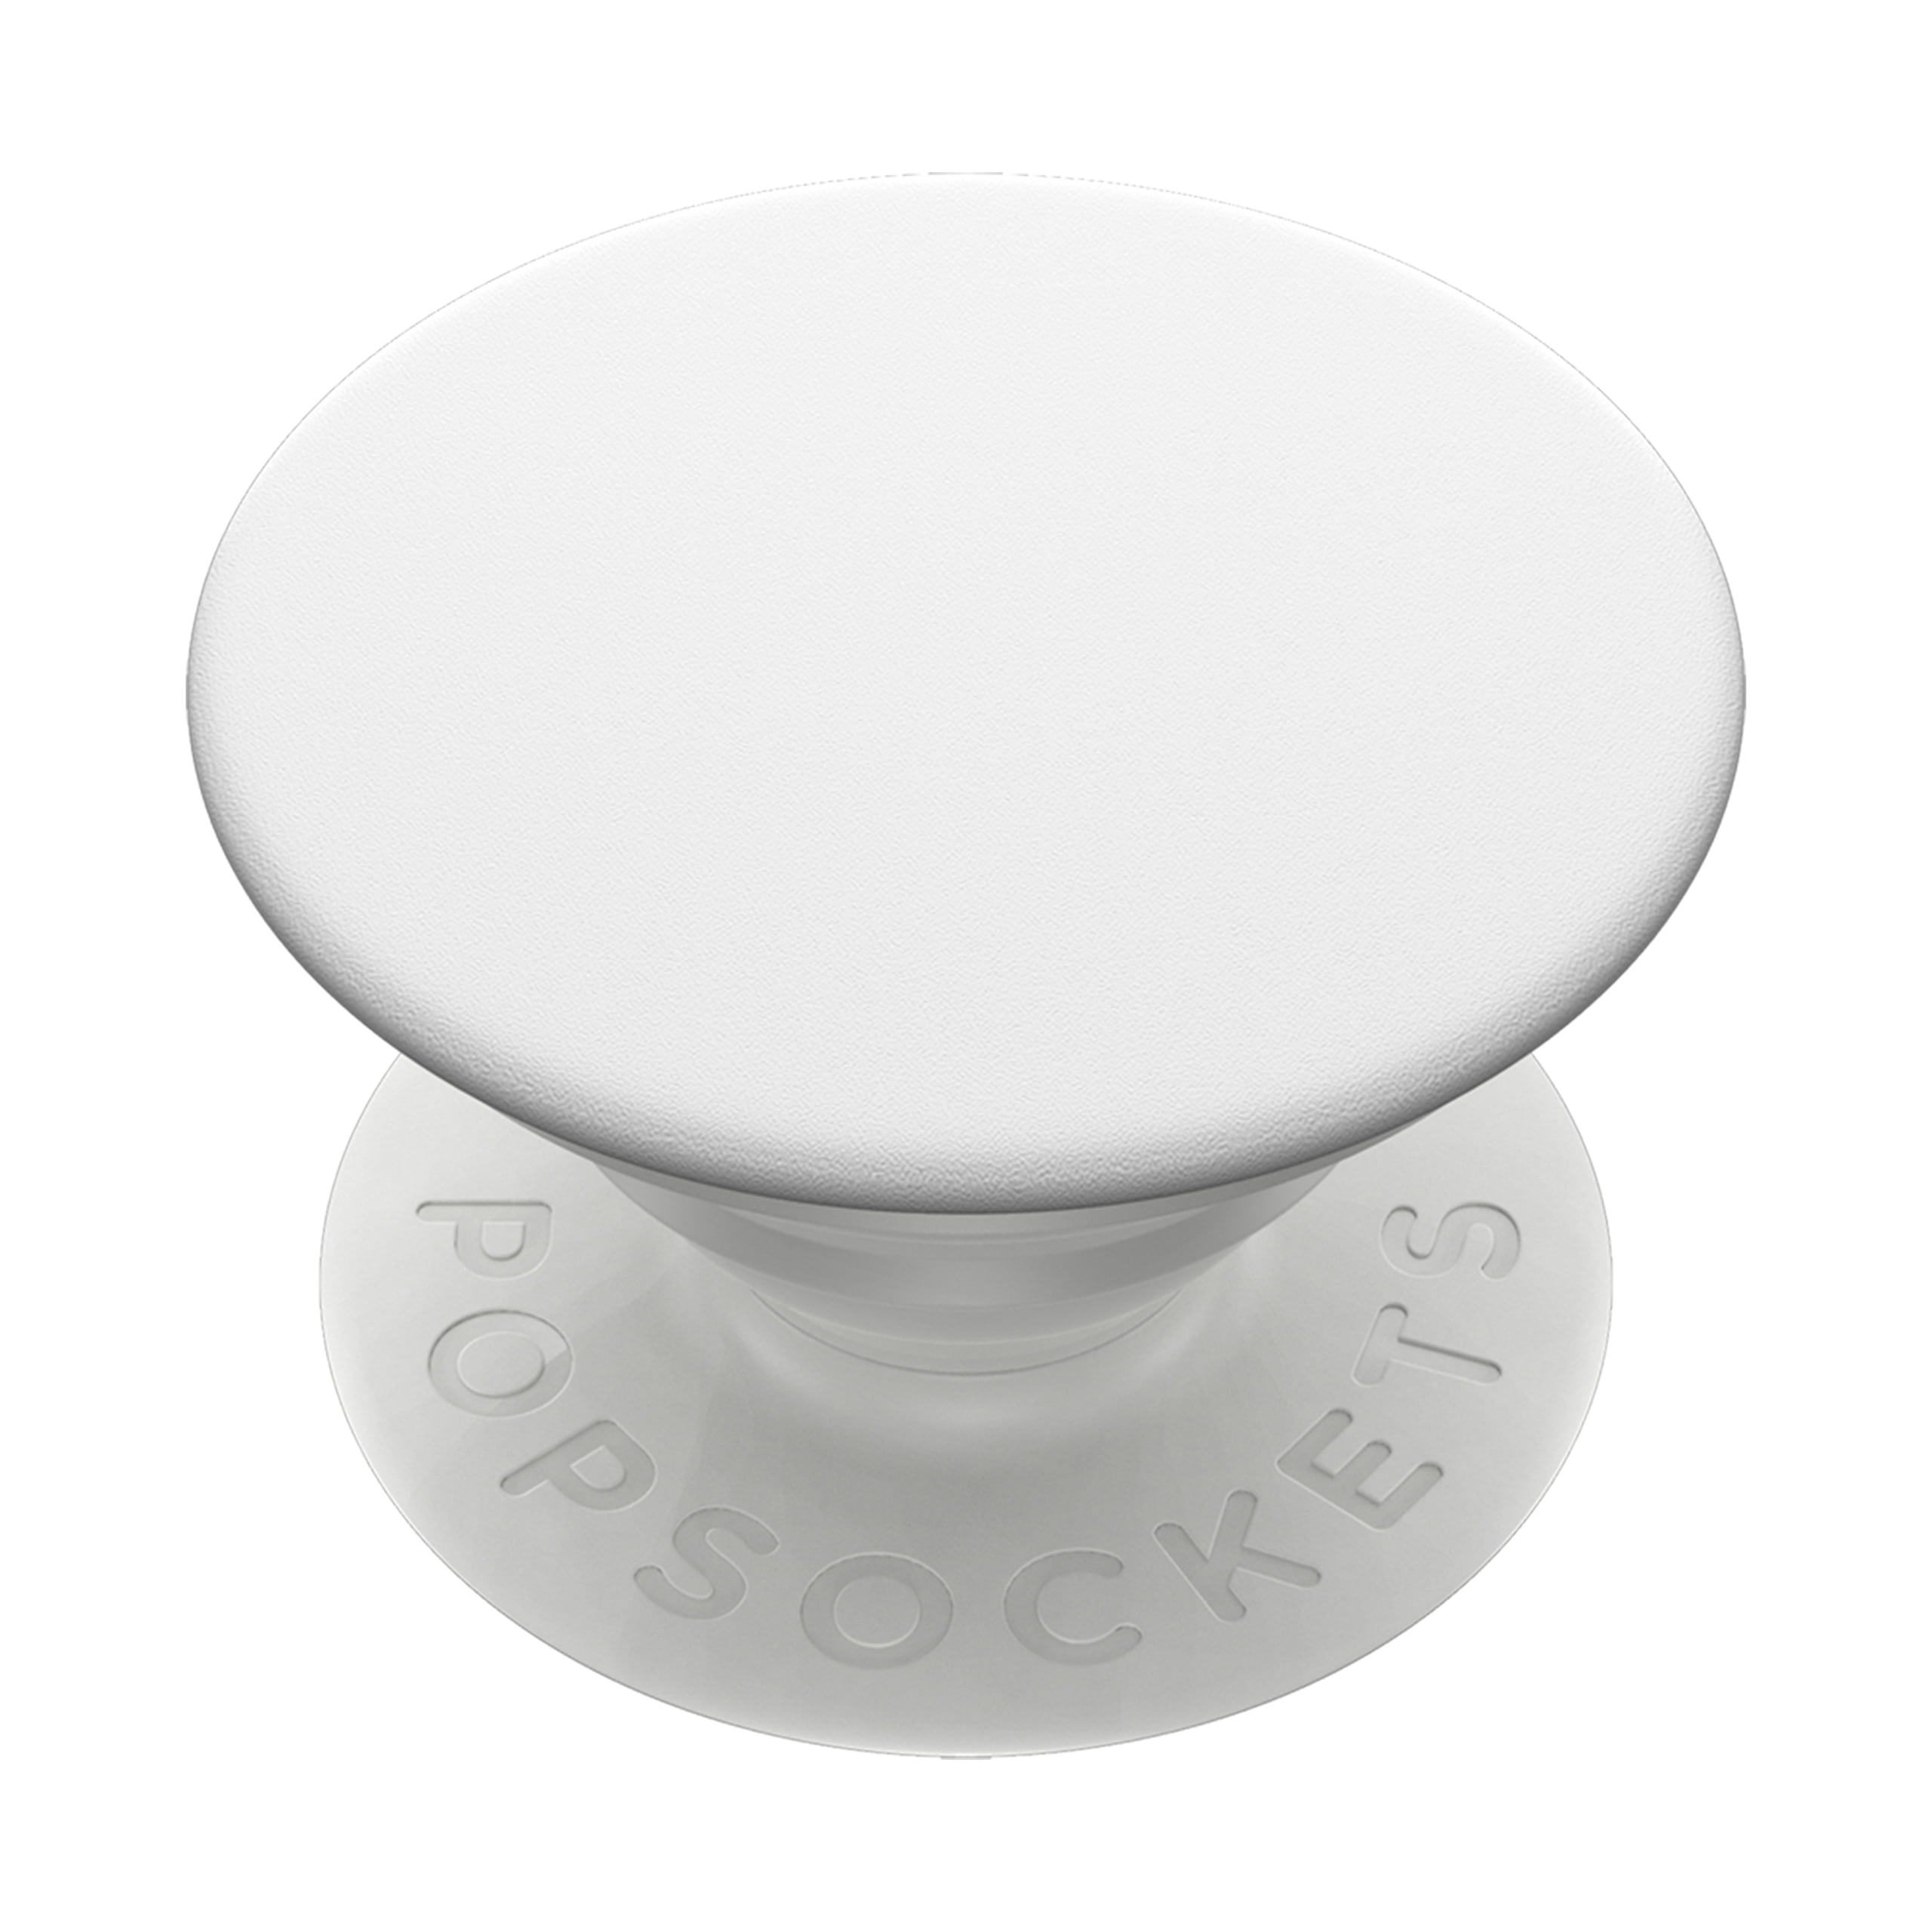 Michelob Ultra White Logo PopSockets Stand for Smartphones & Tablets PopSockets Popgrip: Swappable Grip for Phones & Tablets PopSockets Standard